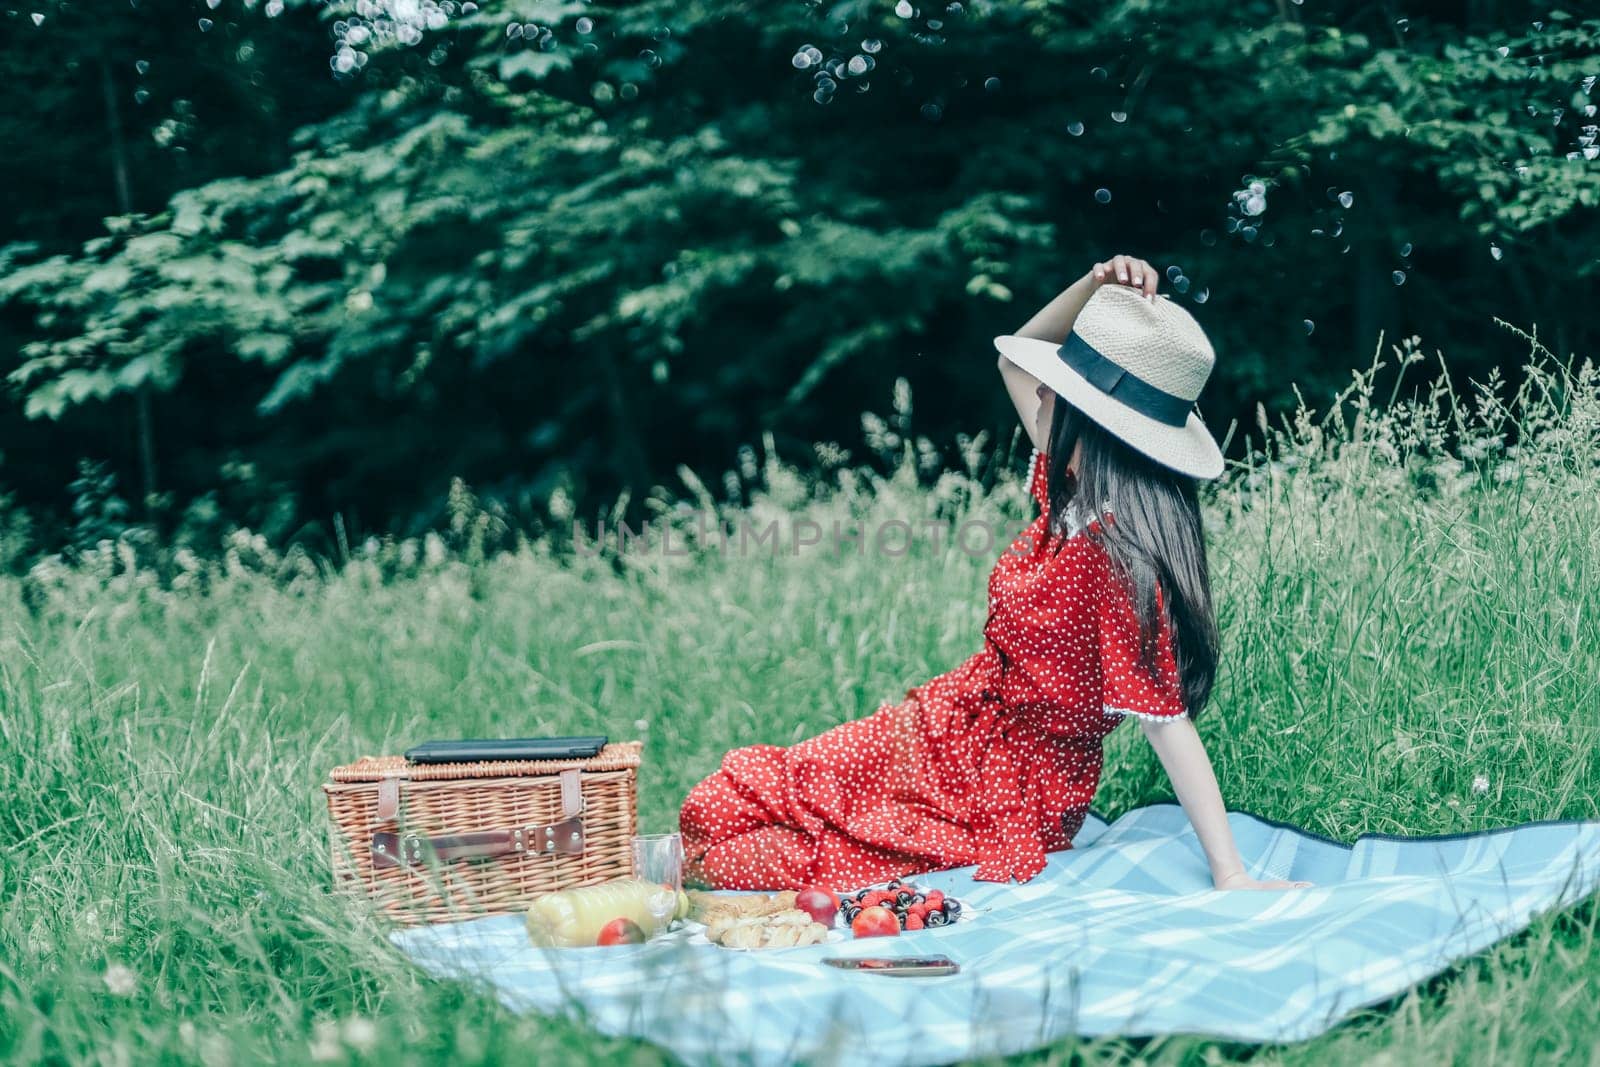 A beautiful young caucasian girl in a red dress covering her face with a straw hat sits half-turned on a blue bedspread with a wicker basket and laid out food in a clearing in a public park, close-up side view. Outdoor picnic concept.